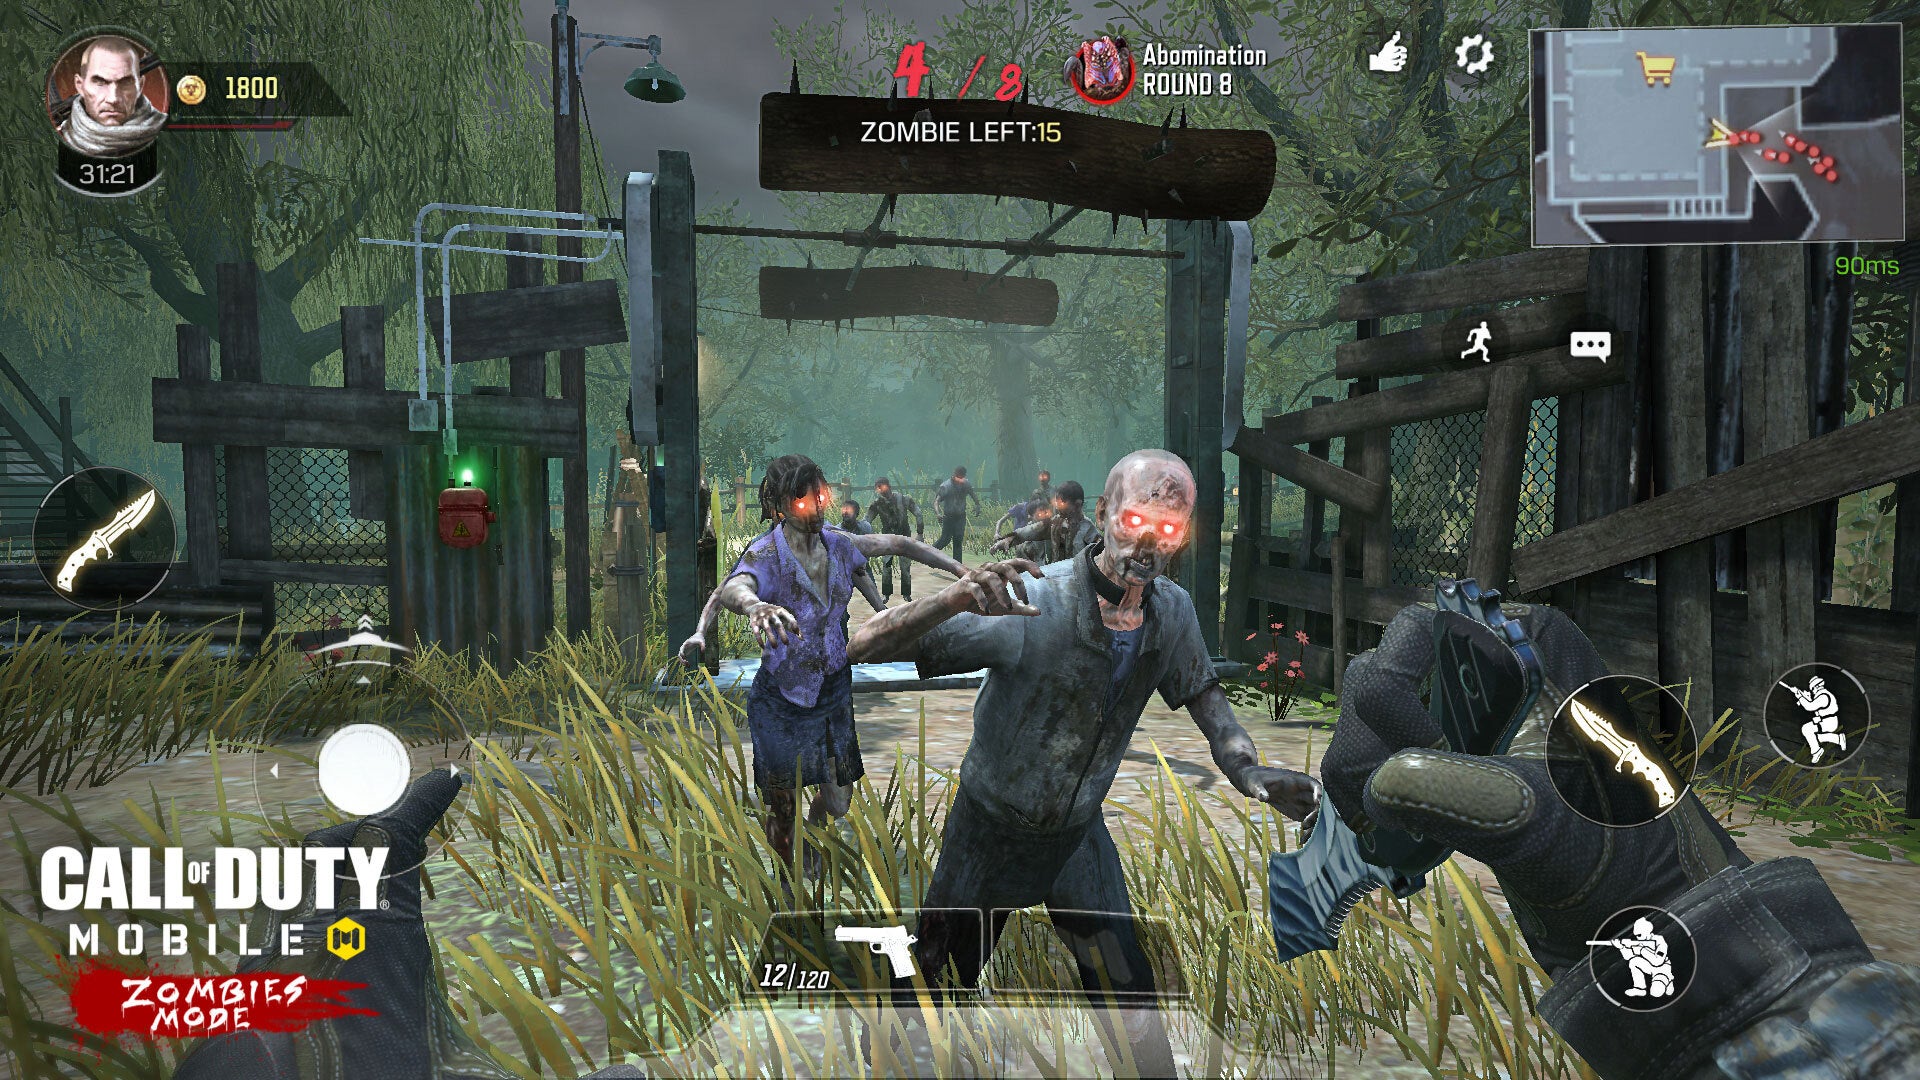 Activision details Call of Duty: Mobile's new Zombies mode, controller support